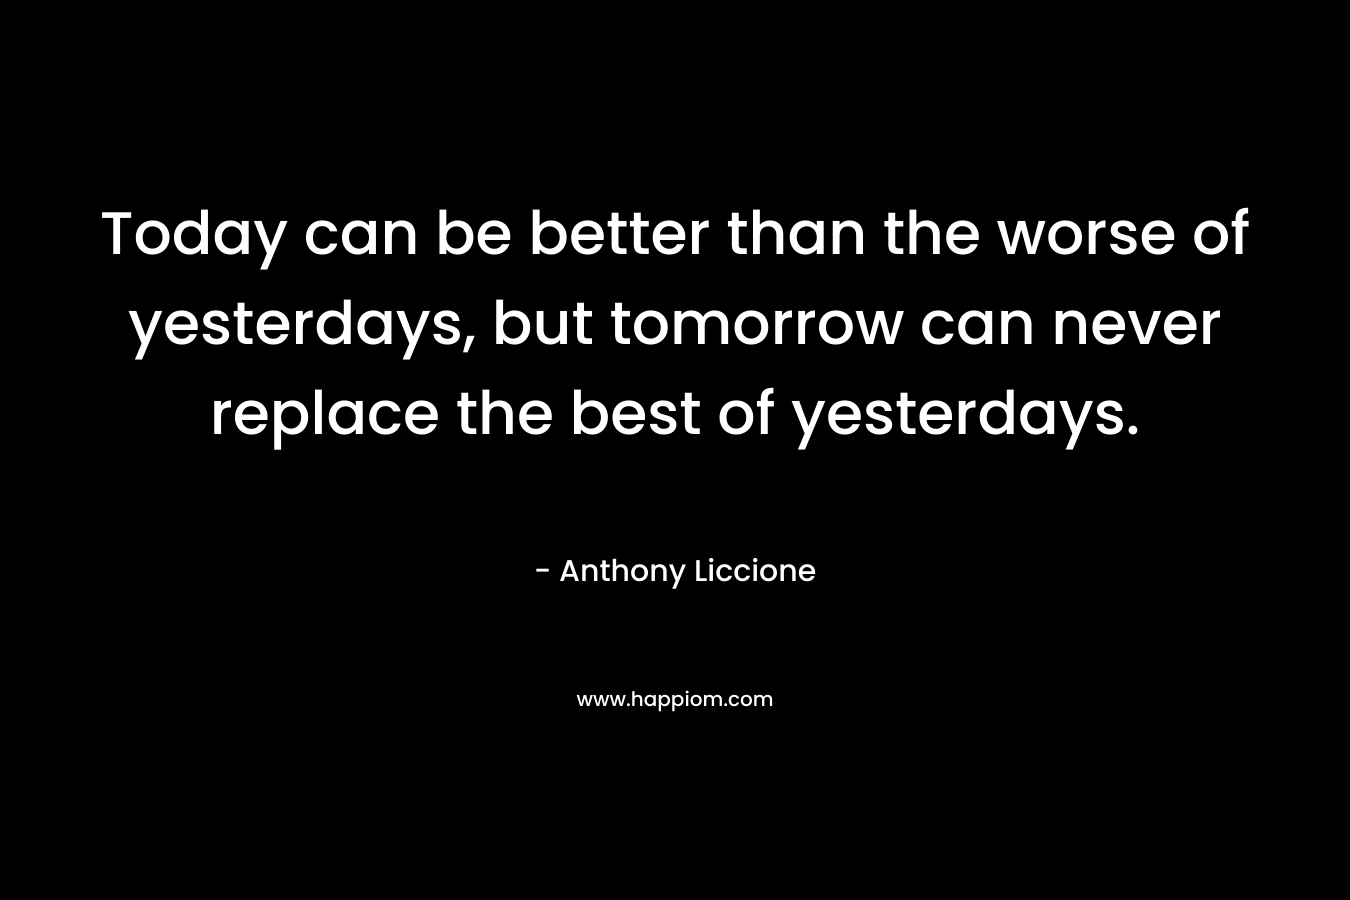 Today can be better than the worse of yesterdays, but tomorrow can never replace the best of yesterdays.